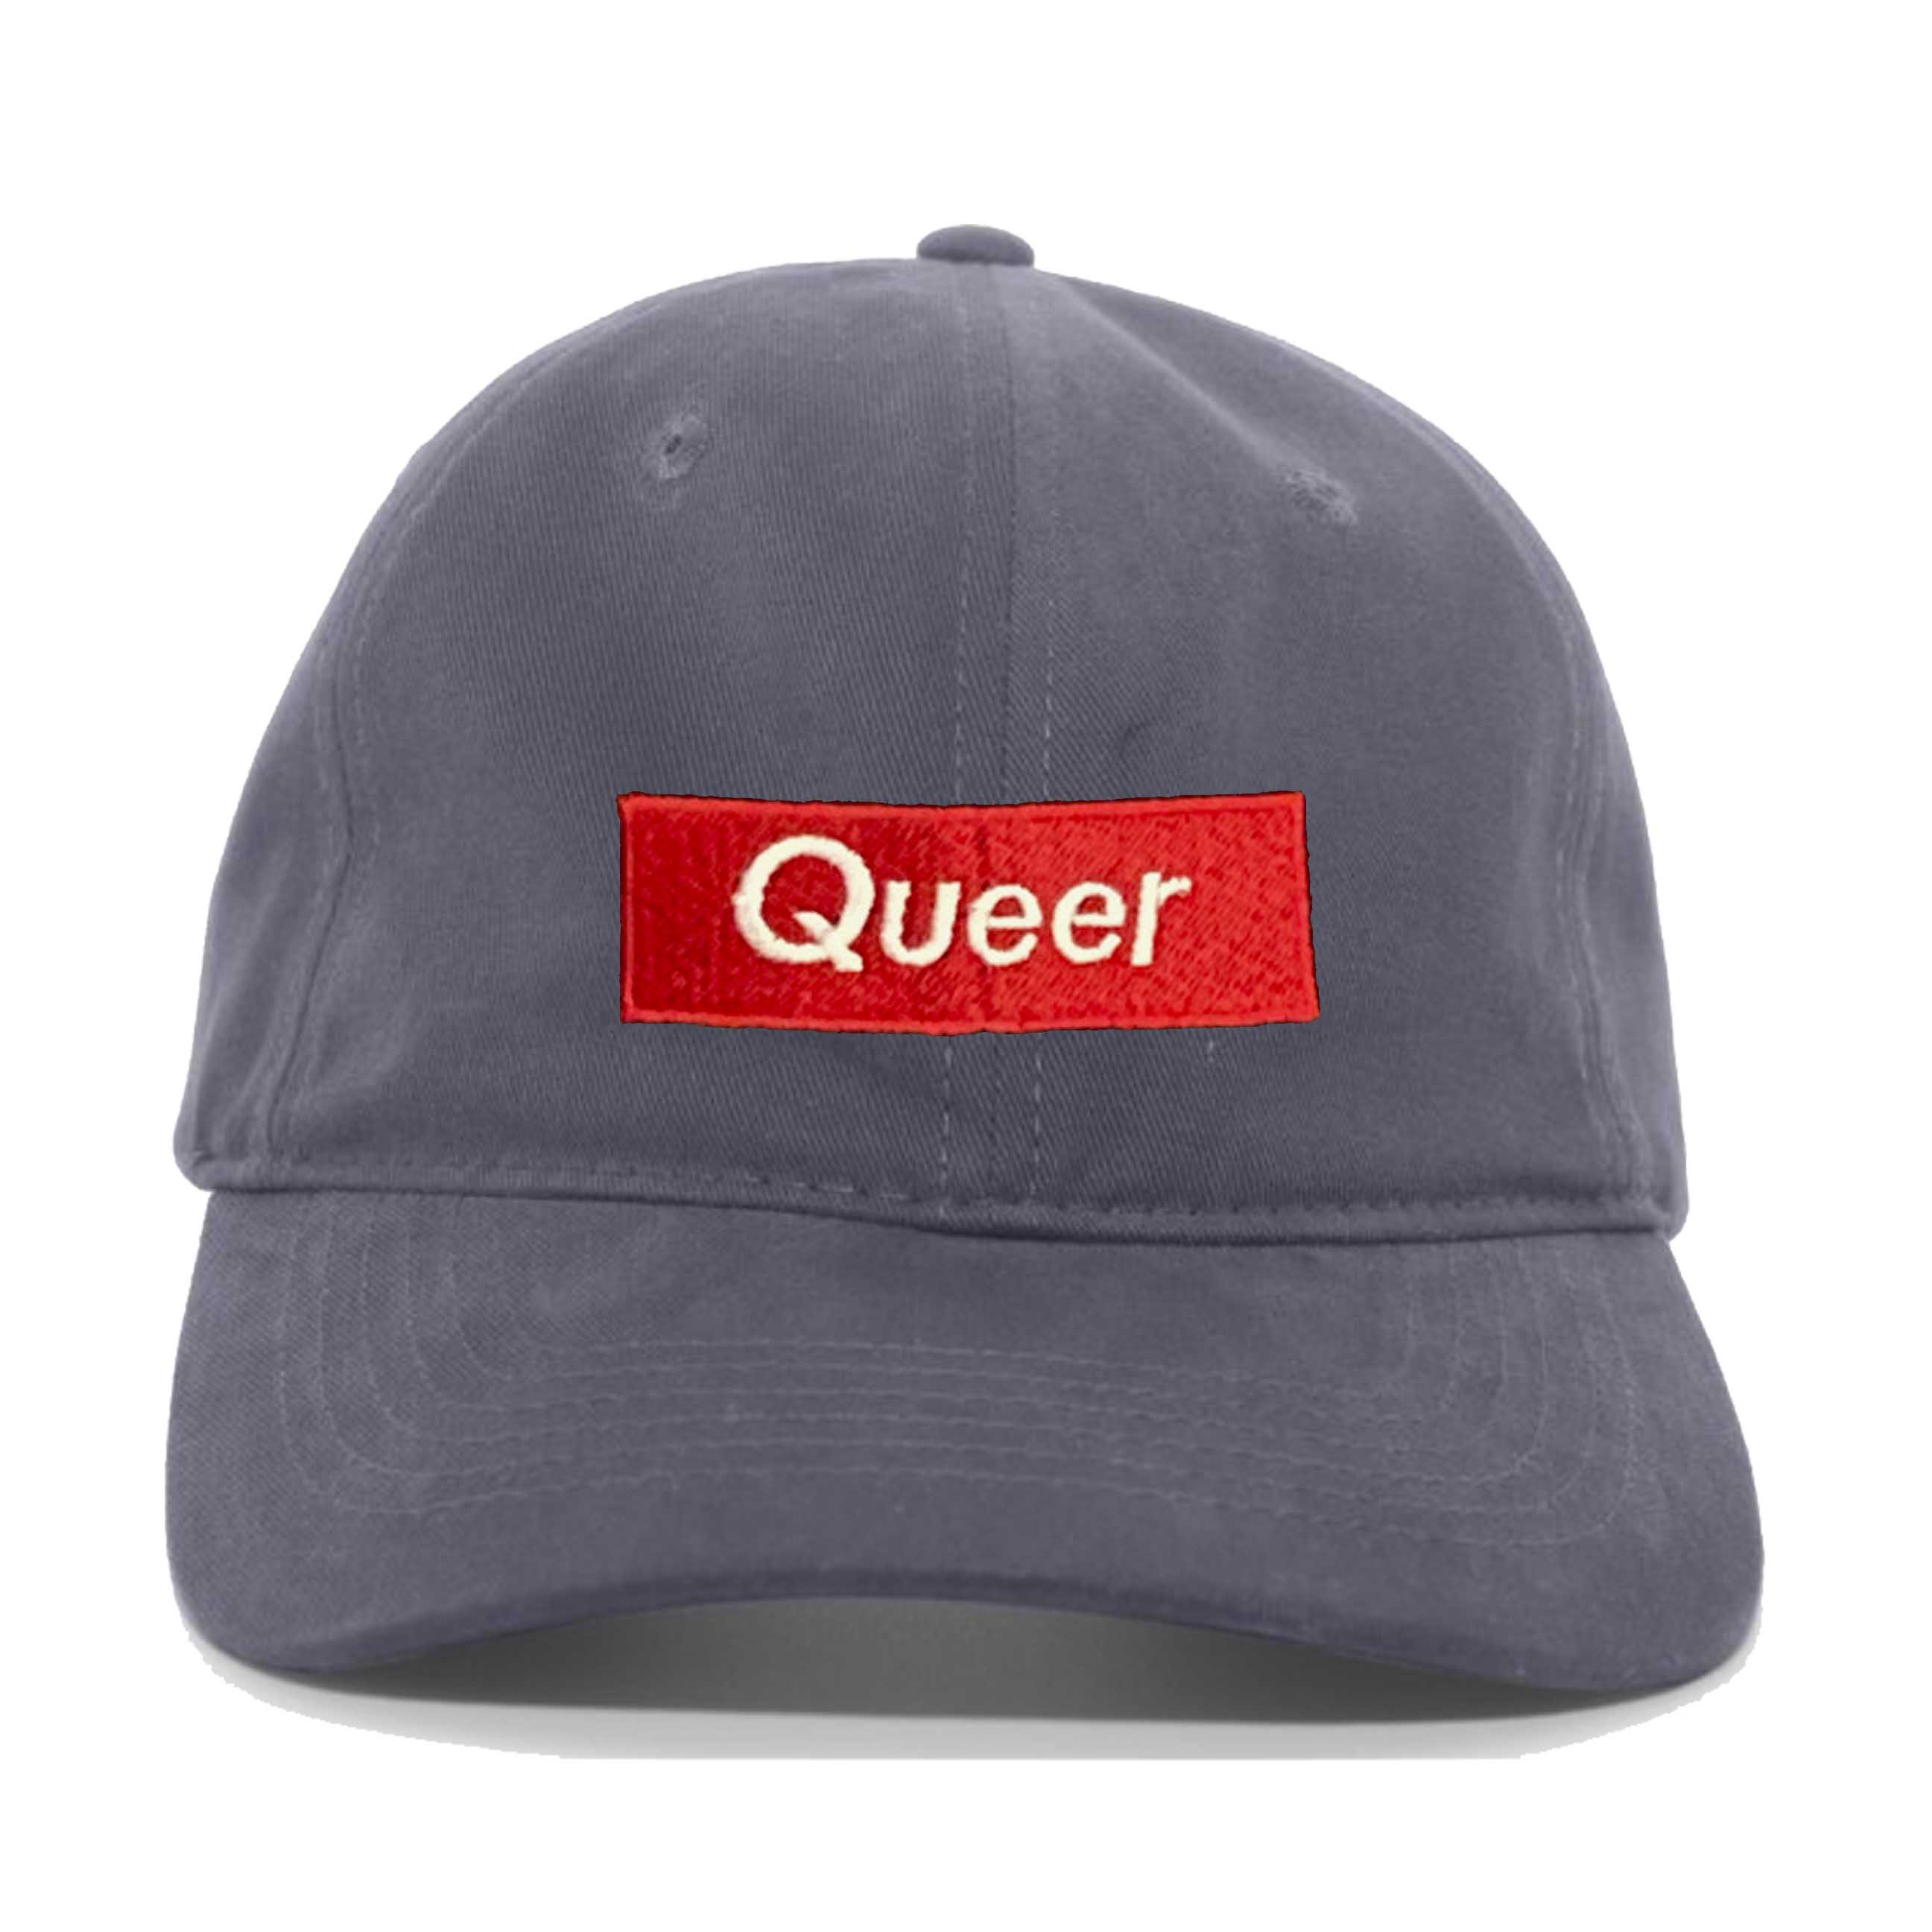 Queer Dad Twill Adjustable Hat charcoal